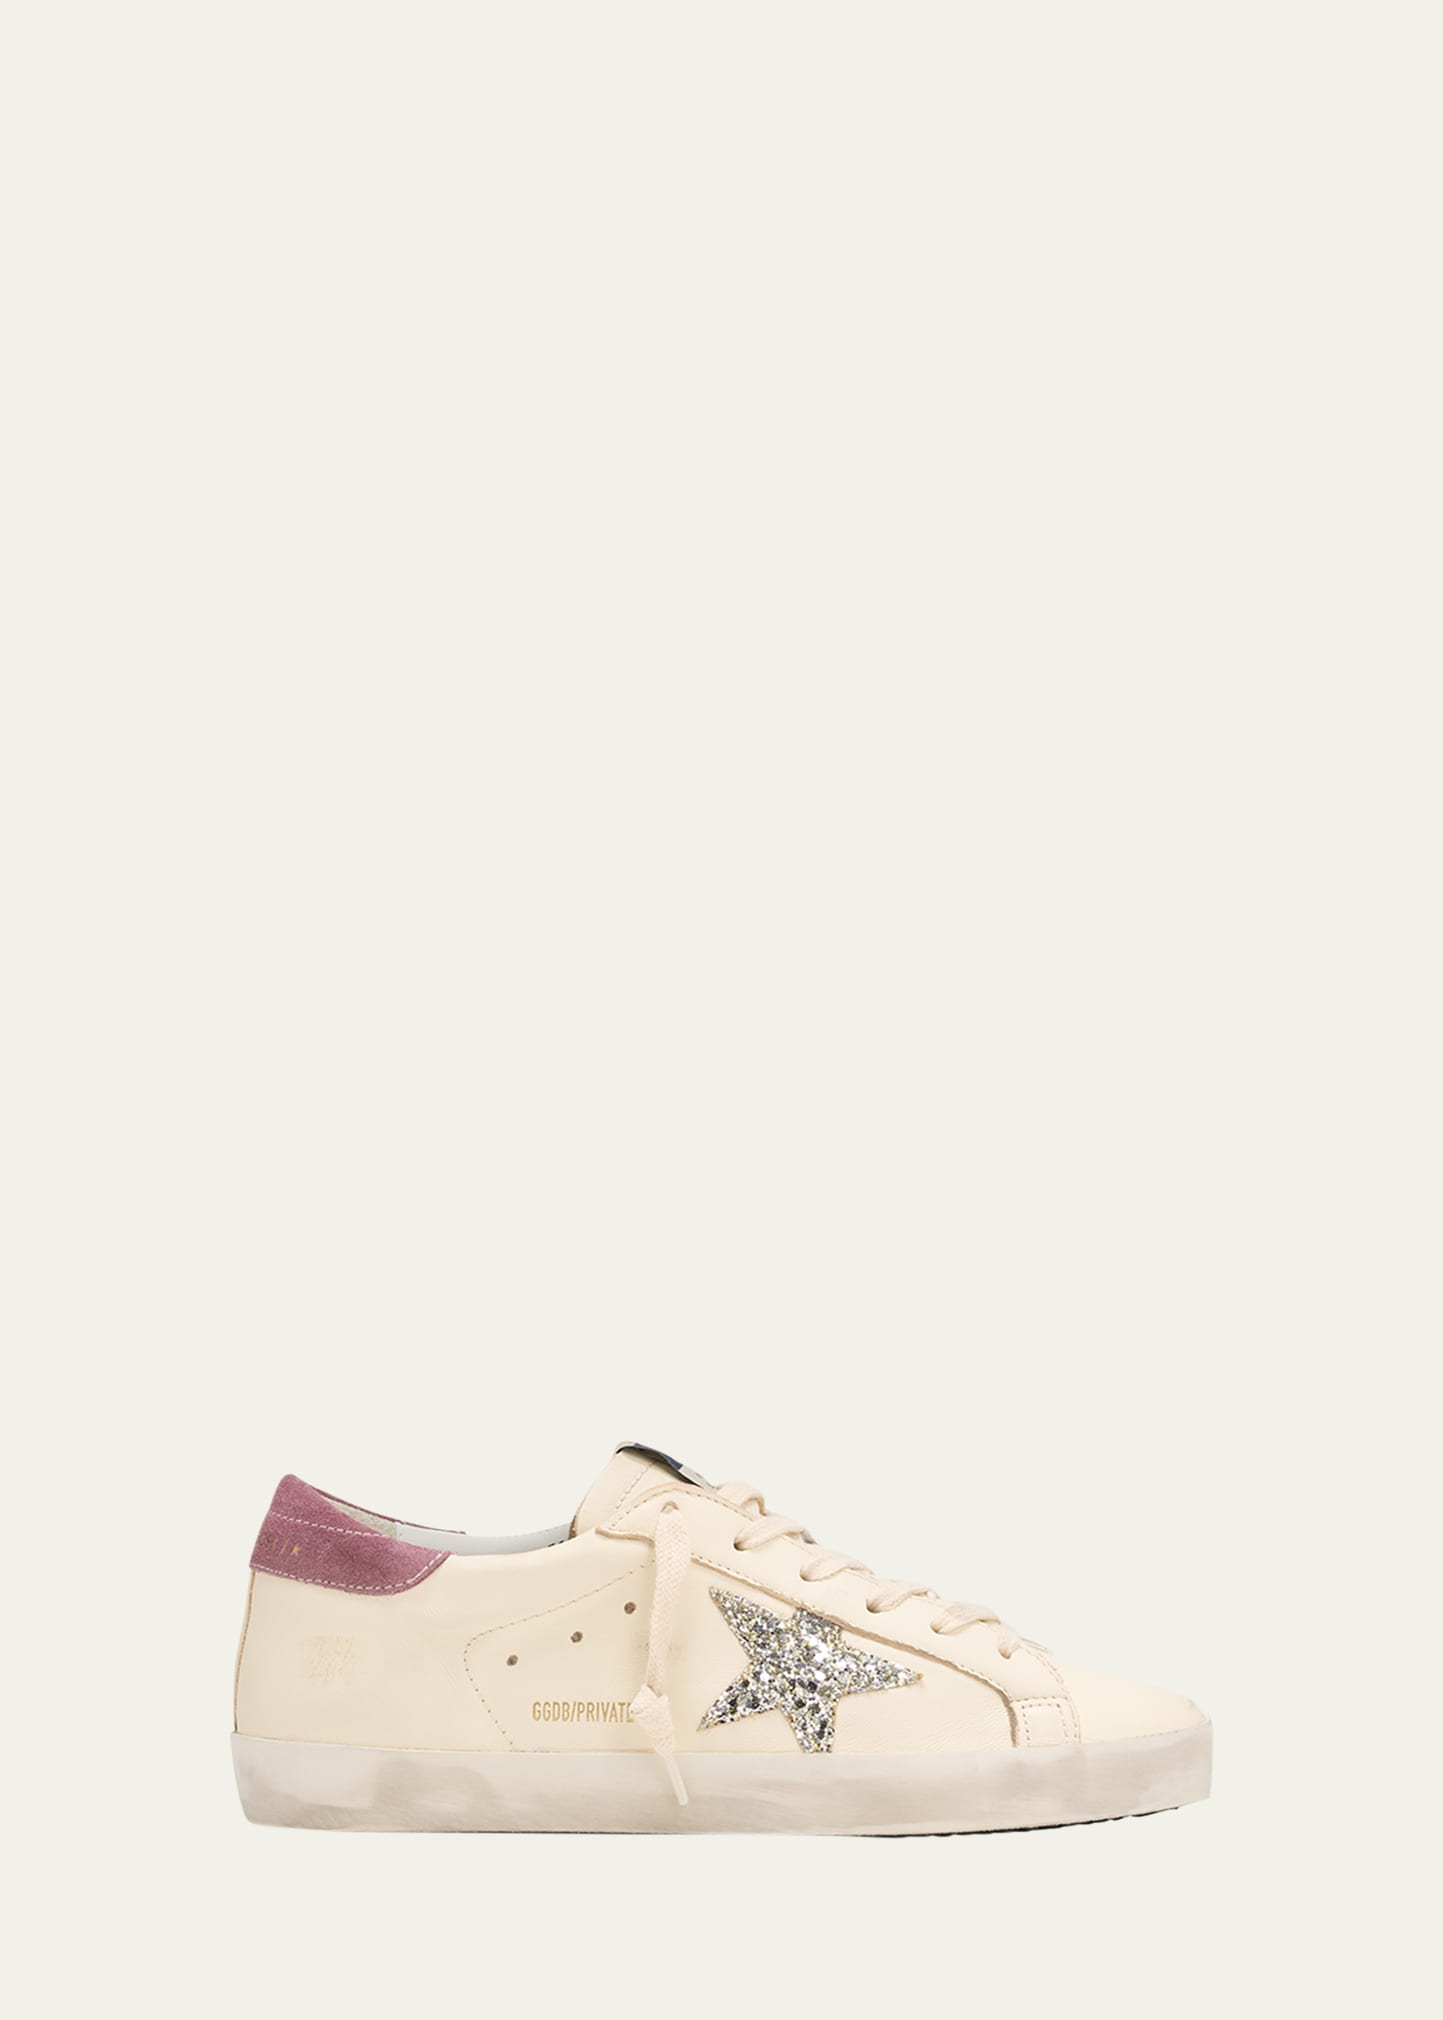 Golden Goose Superstar Glitter Leather Low-top Sneakers In Multi